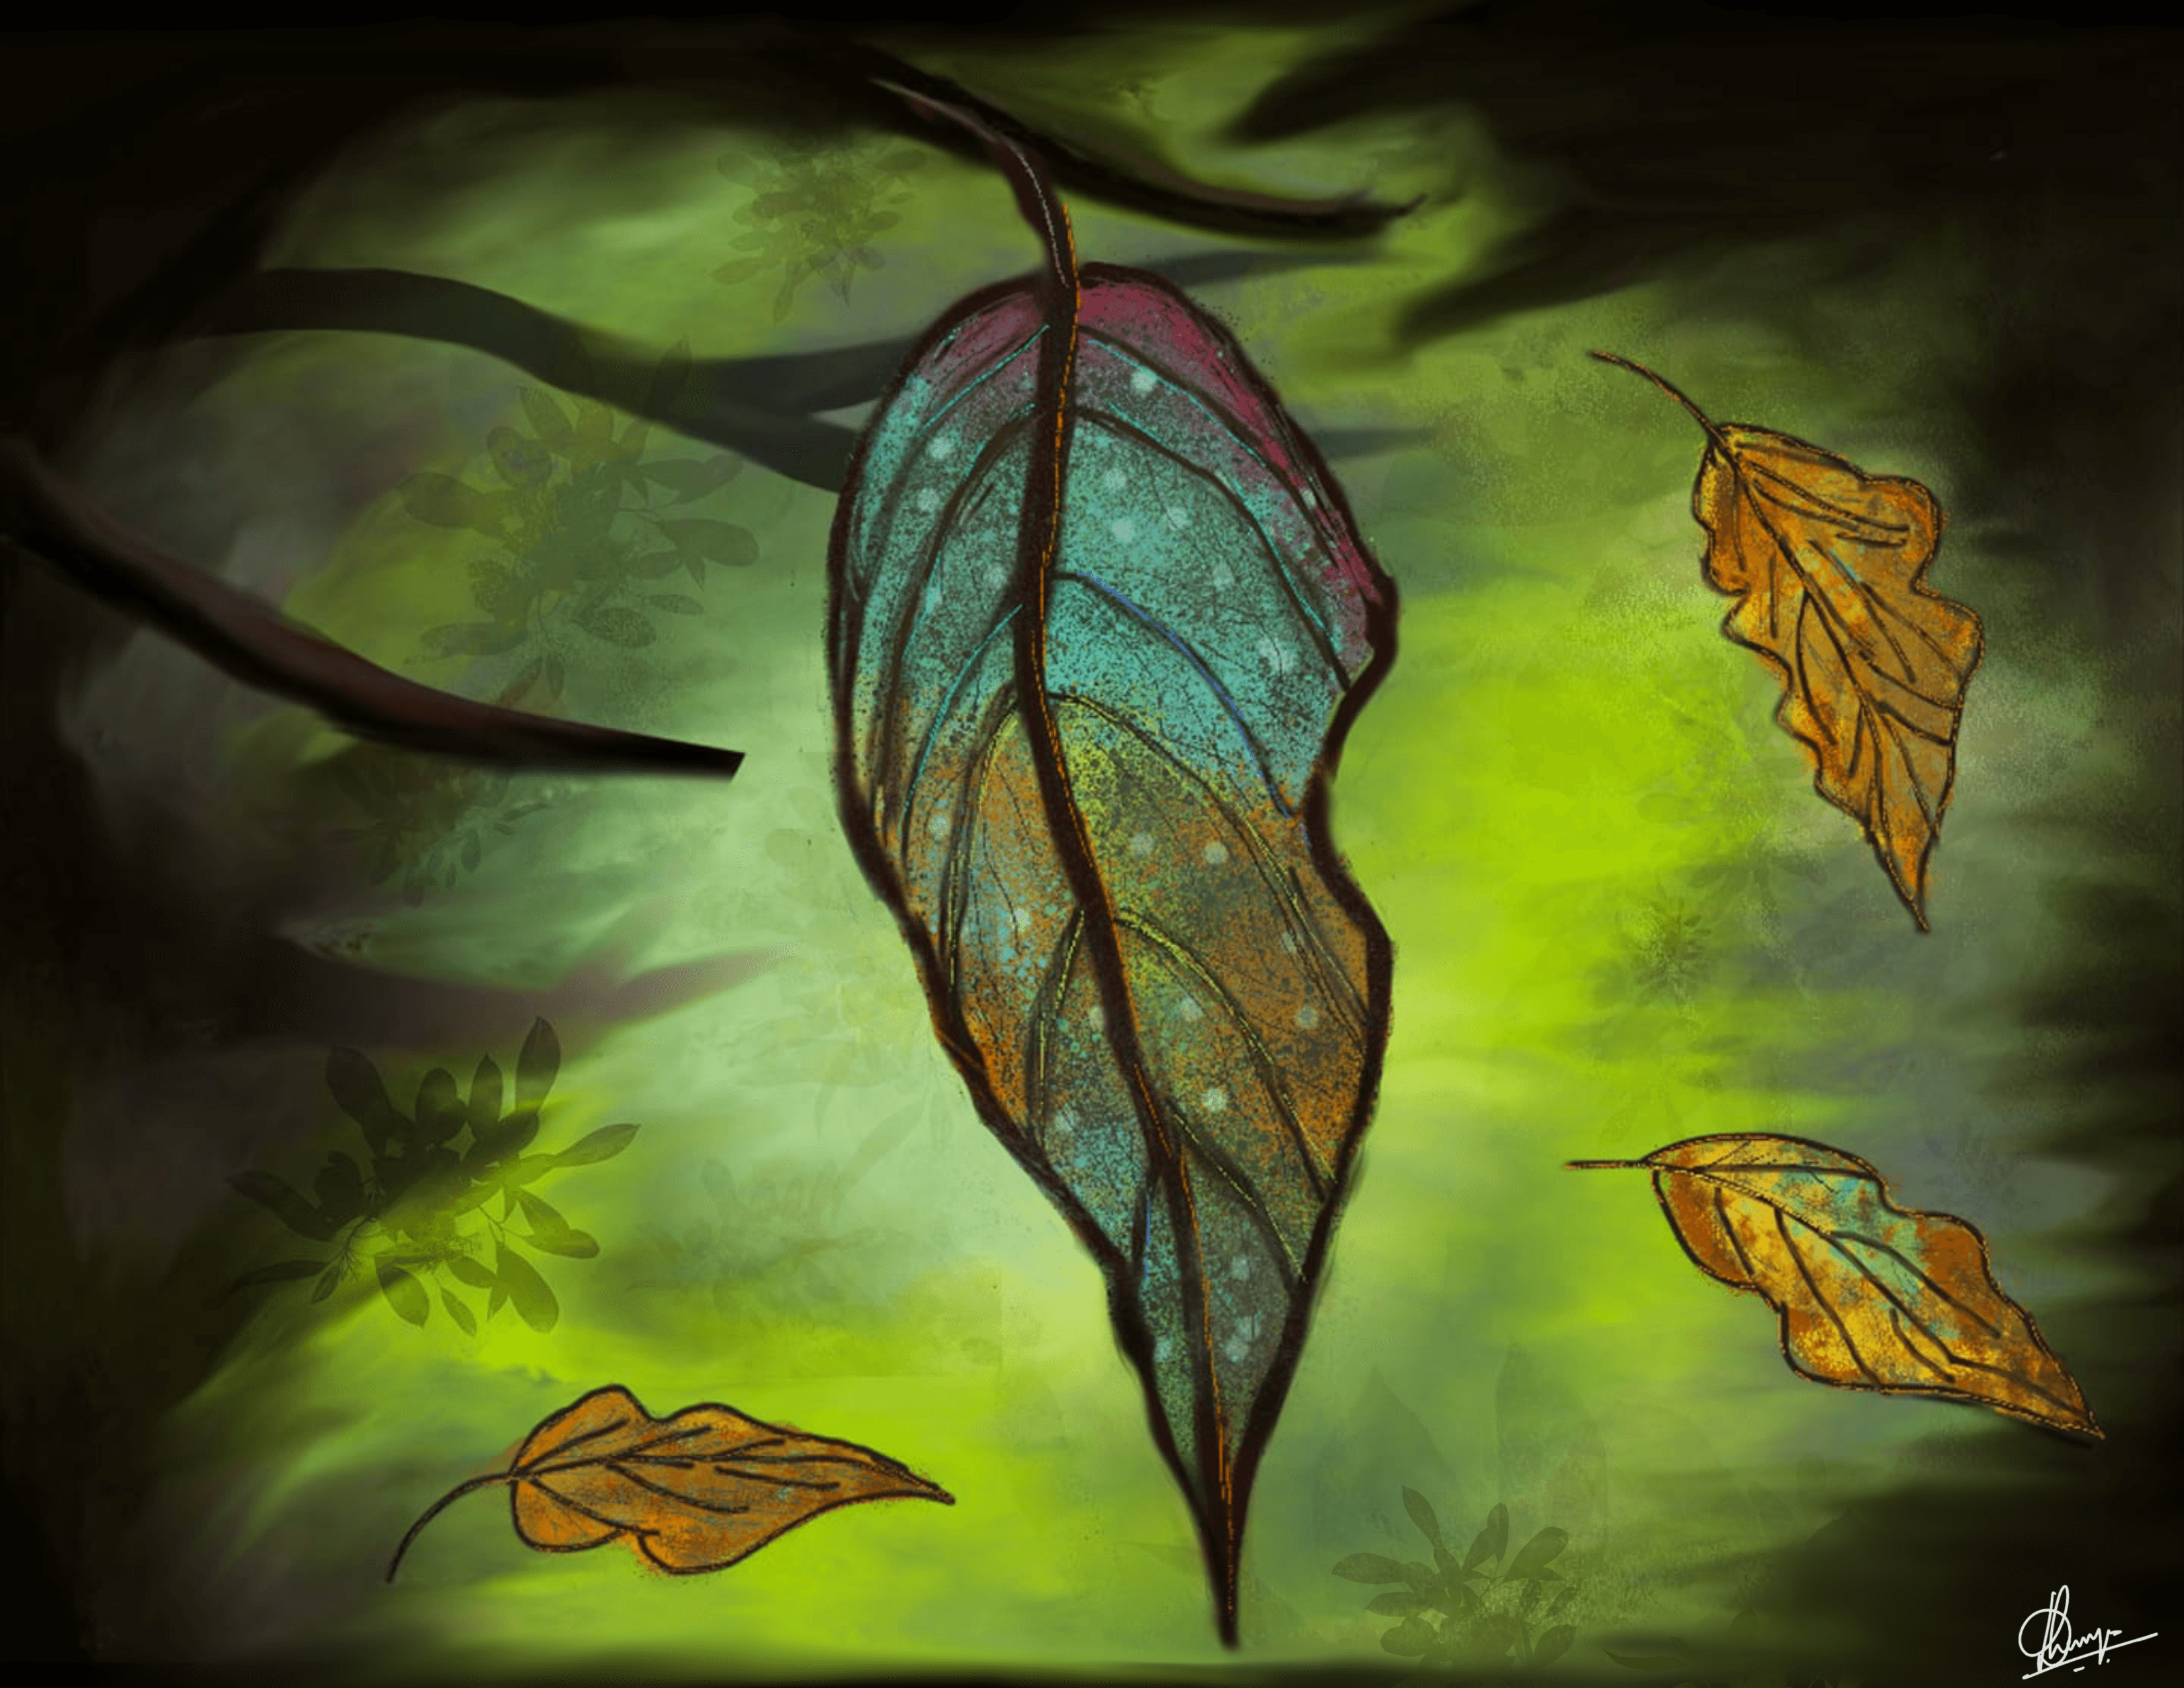 The Withering Leaves